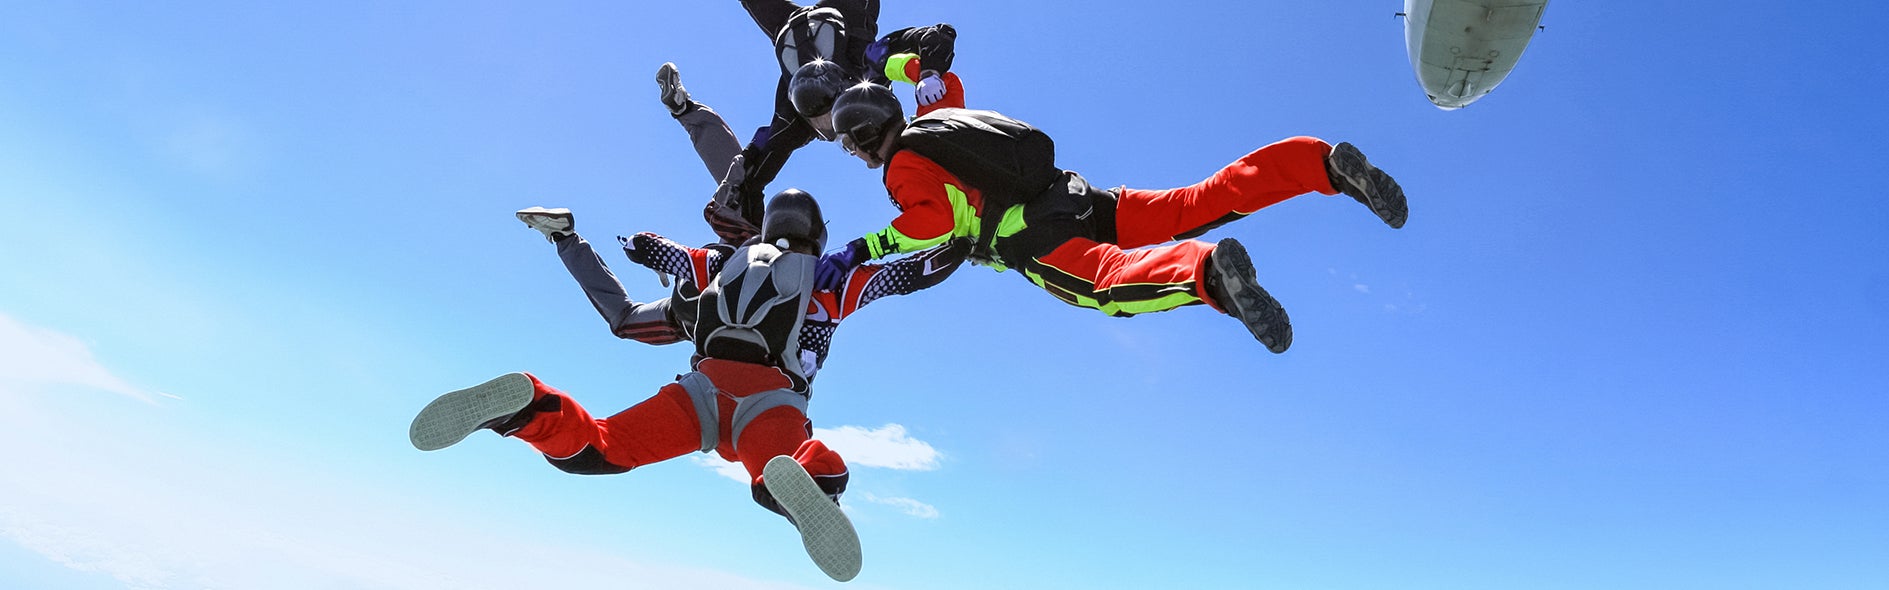 Image of skydivers having a thrilling experience. Compliance with chemical regulations on the other hand shouldn’t be thrilling.